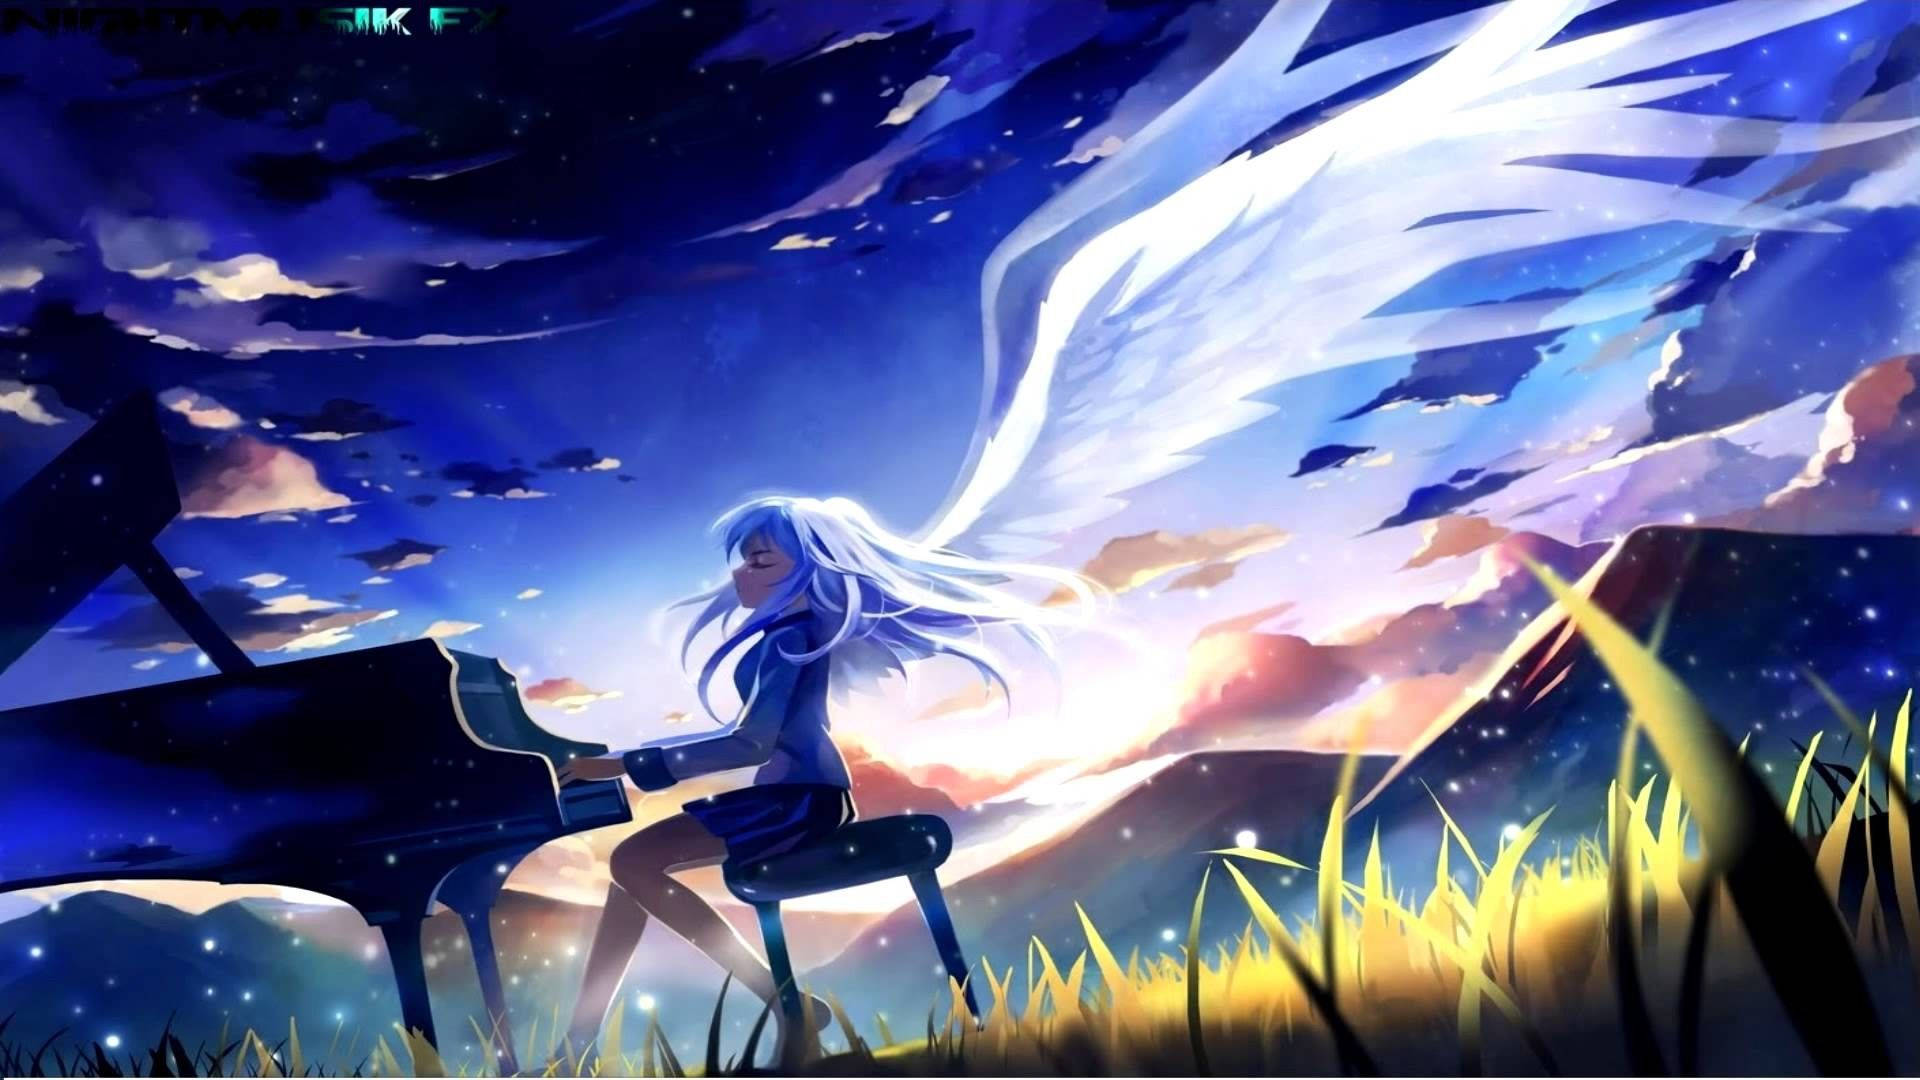 Cool Anime Girl With Wings Wallpaper